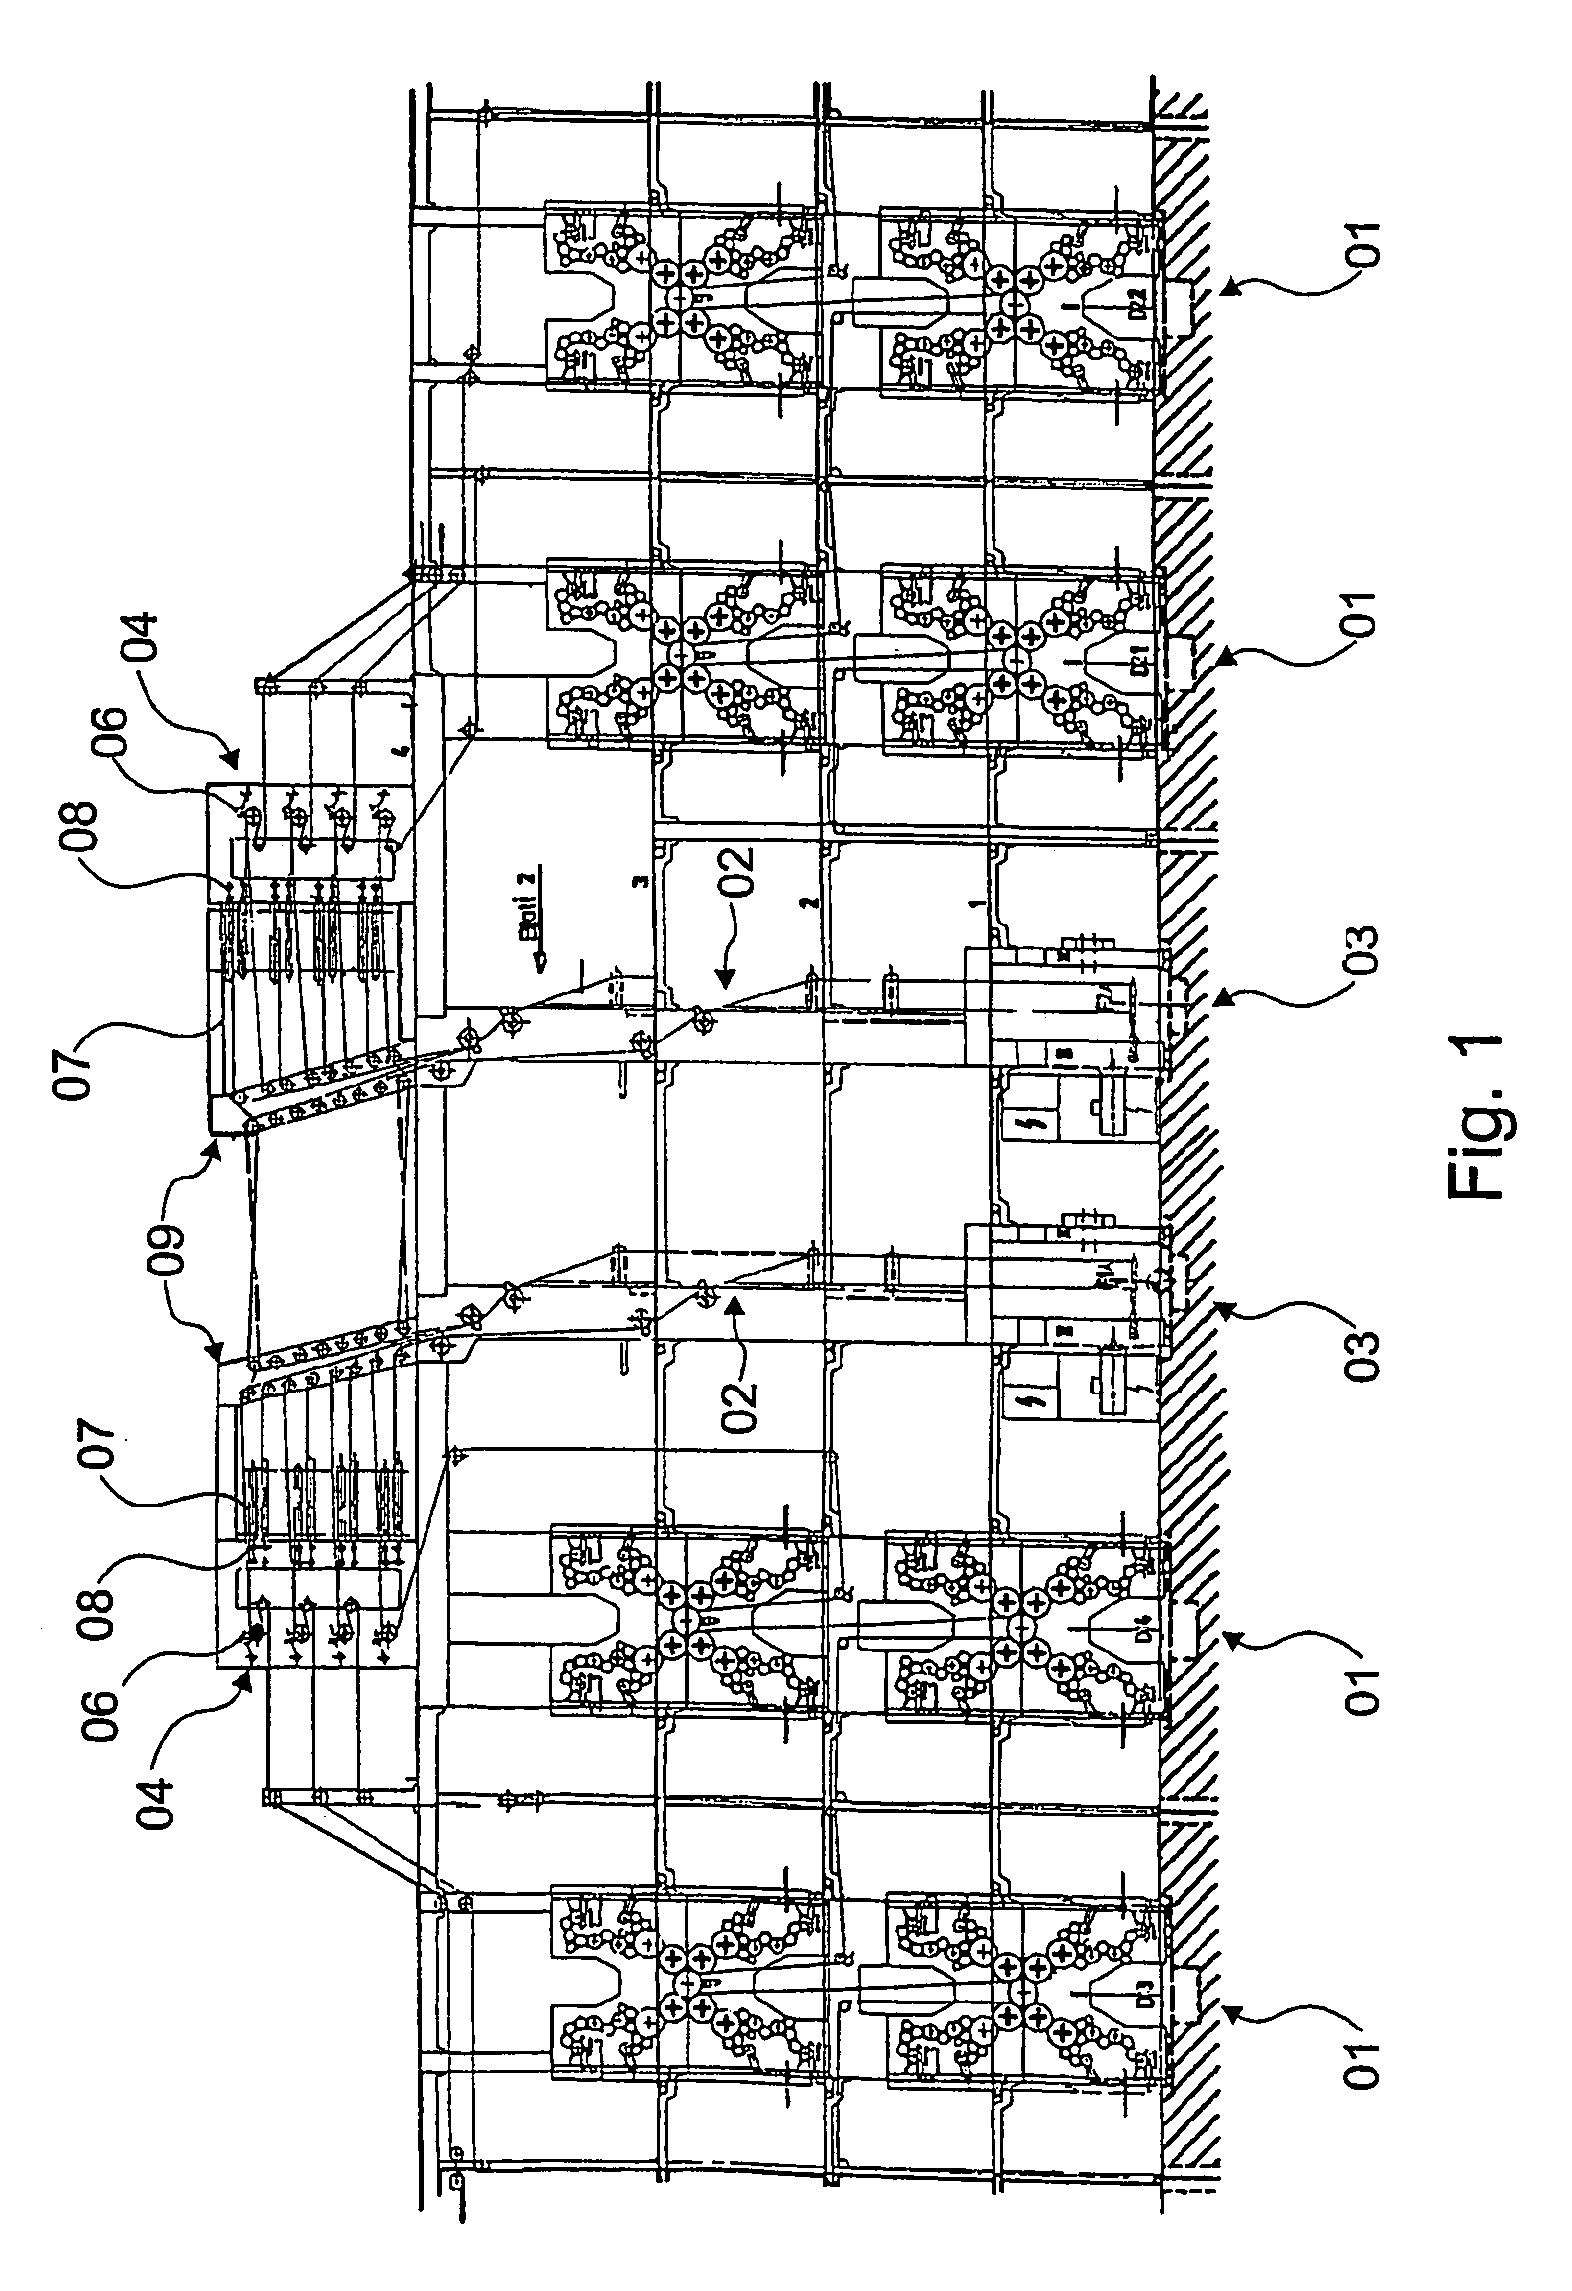 Devices for guiding a partial width web, guide element for guiding a partial width web and processing machine comprising said devices